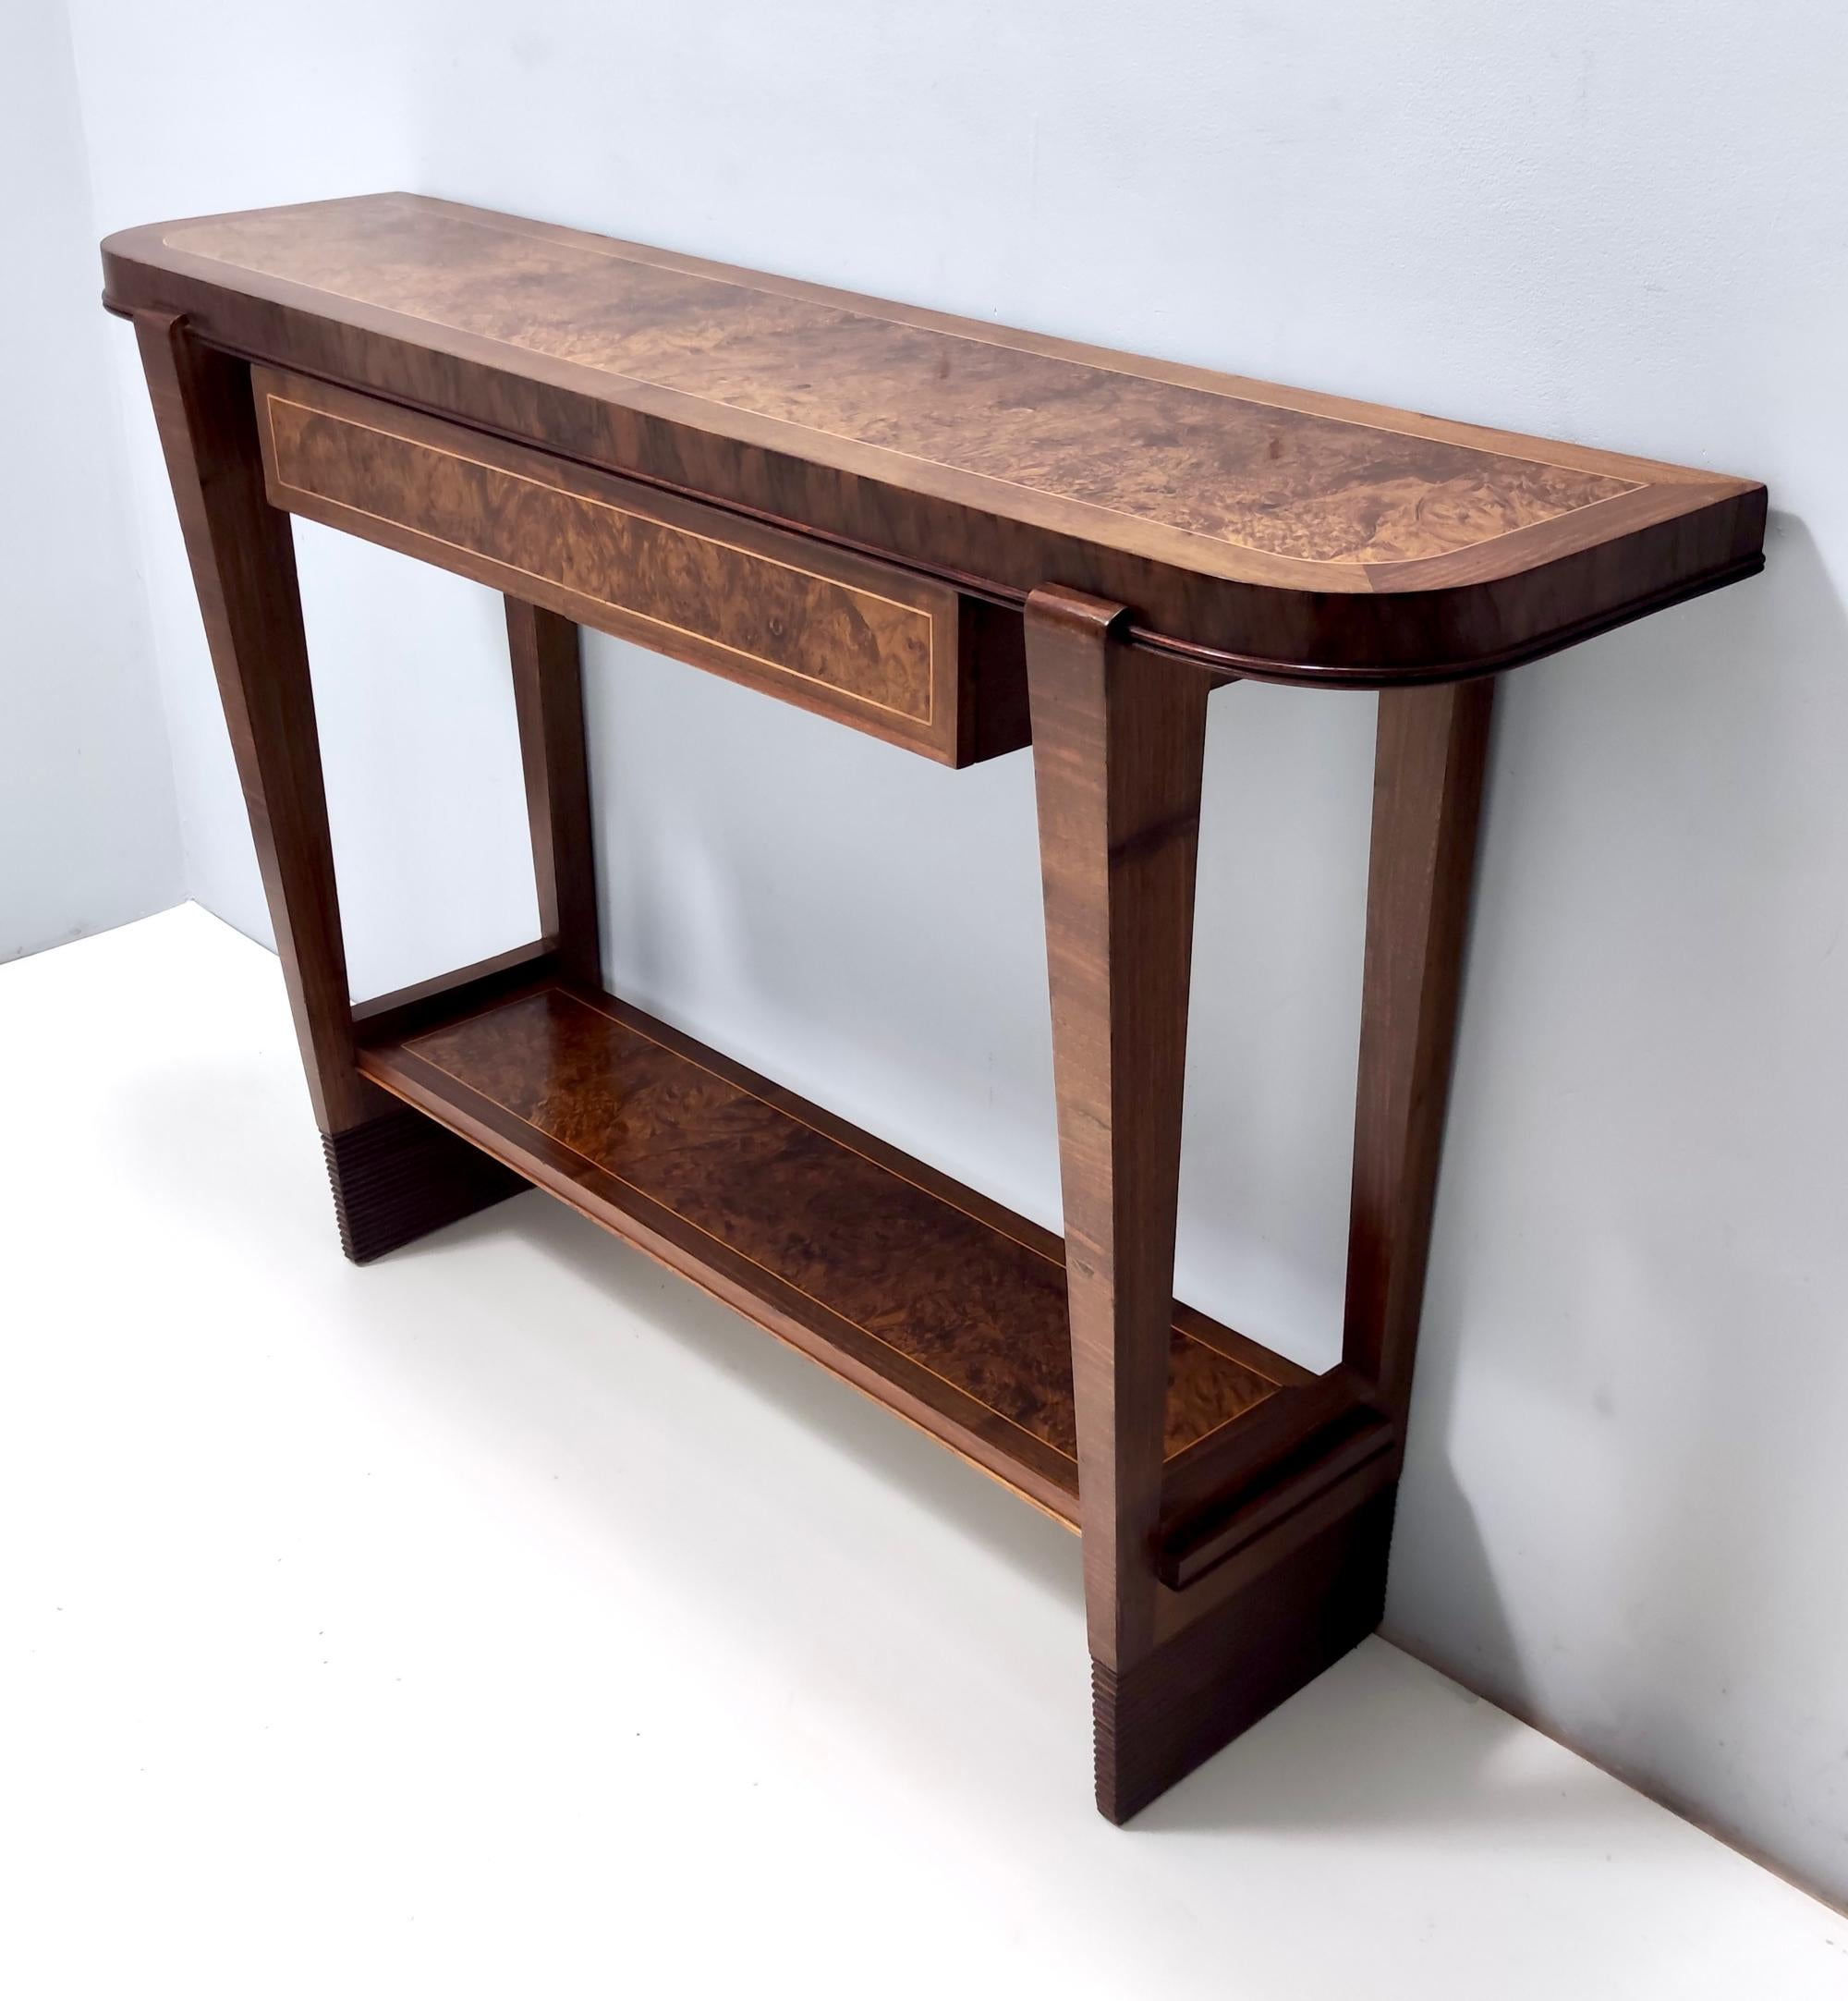 Vintage Walnut Console Table Ascribable to Paolo Buffa with Two Drawers, Italy In Excellent Condition For Sale In Bresso, Lombardy